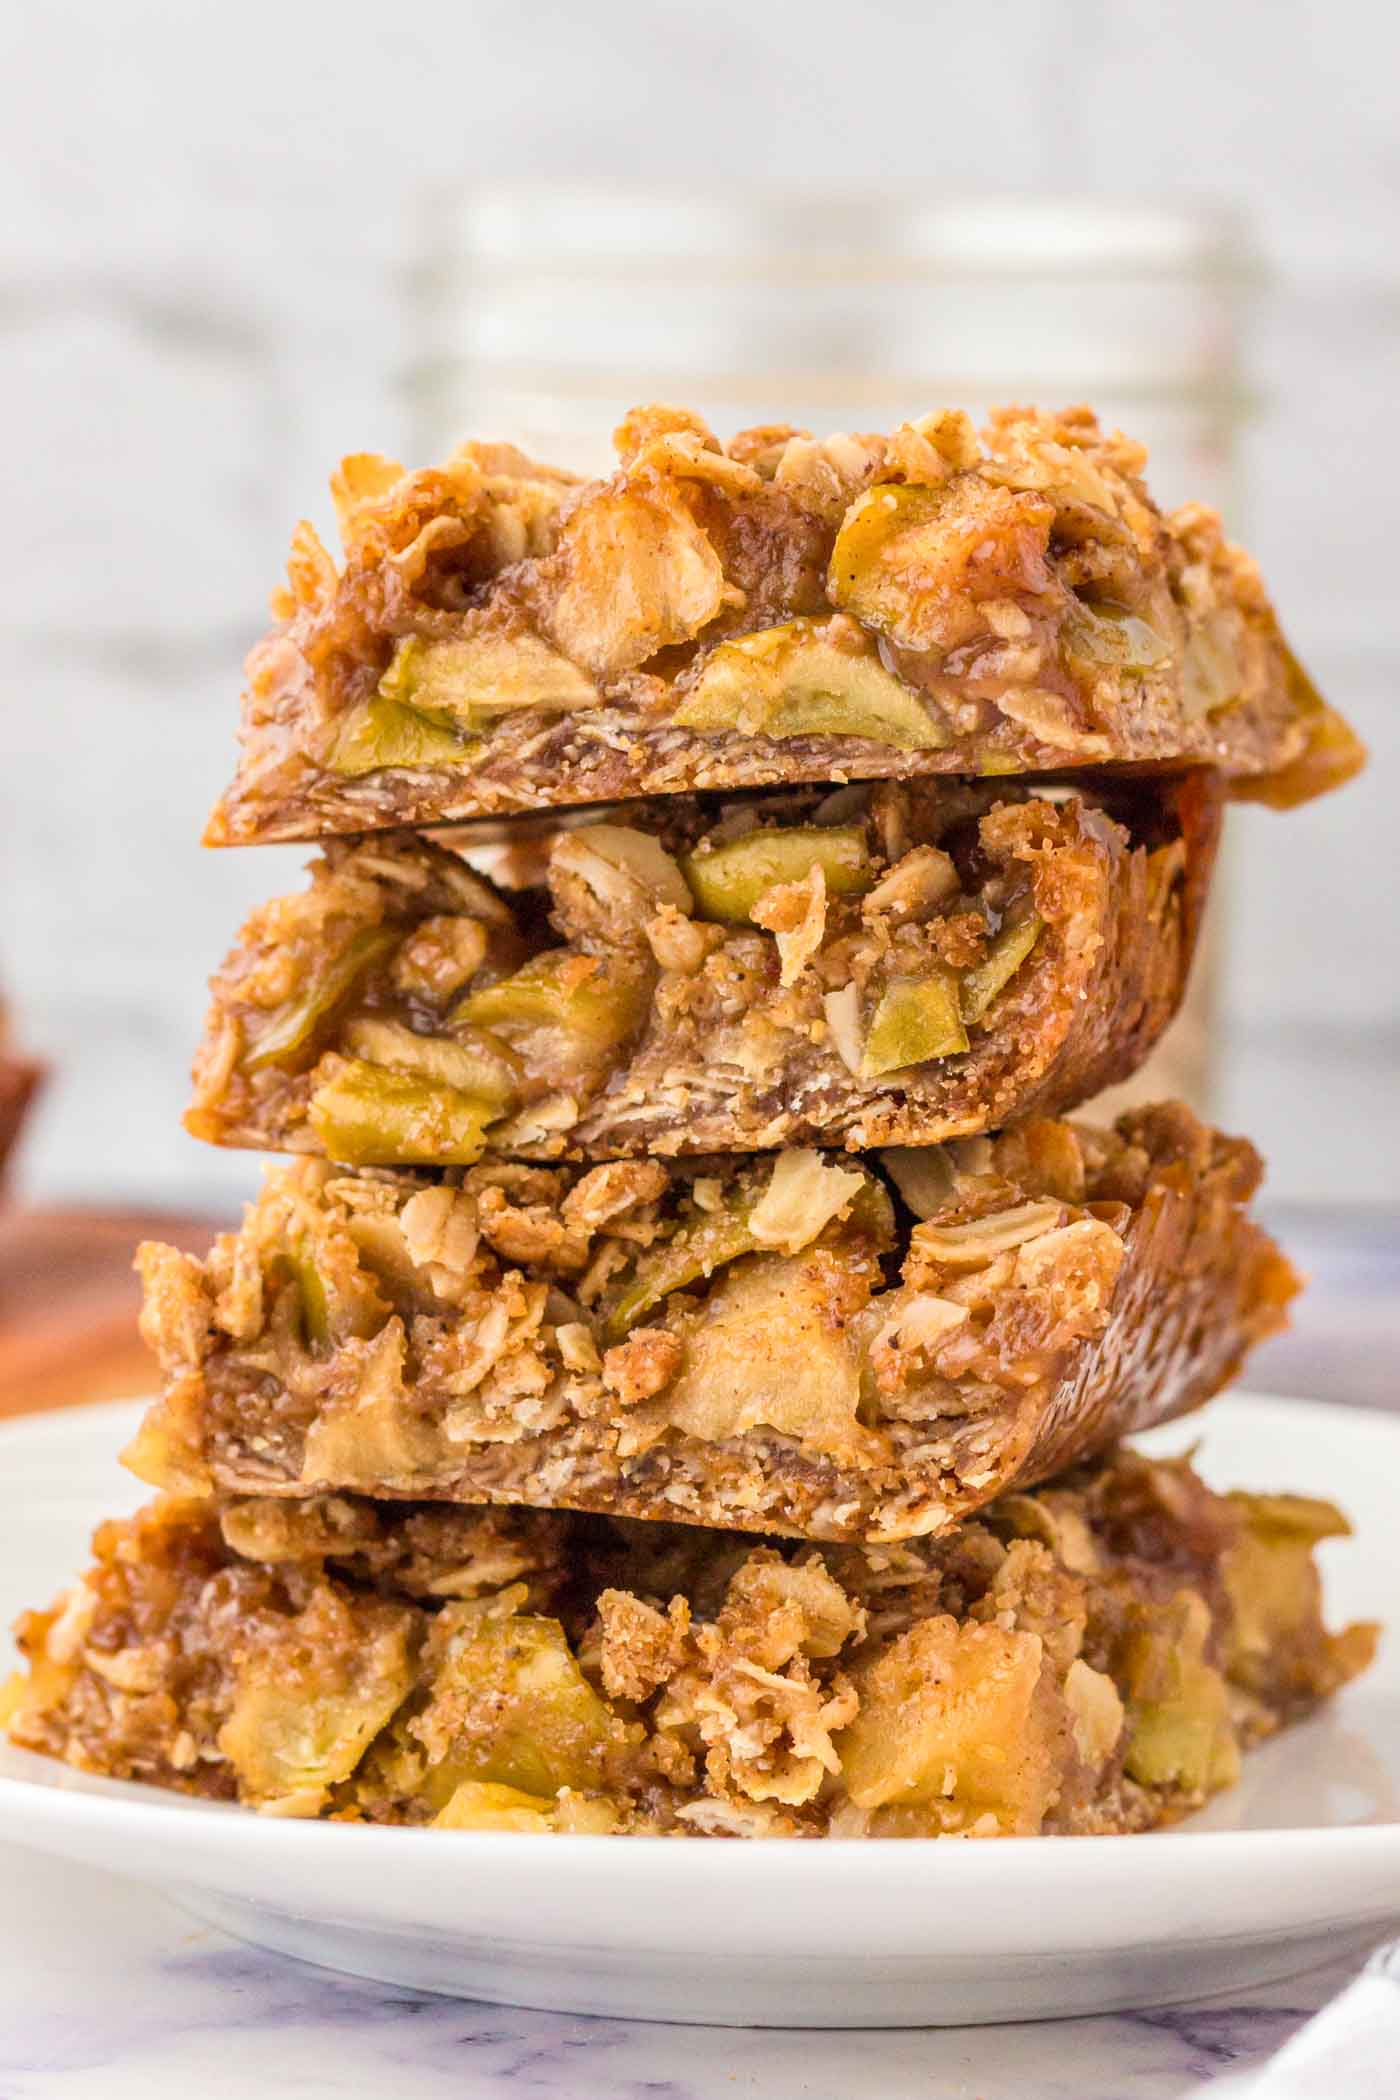 Stack of 4 apple crumble bars on a plate. The bars have an oatmeal crust and crumble topping with a layer of apple pie filling in between.